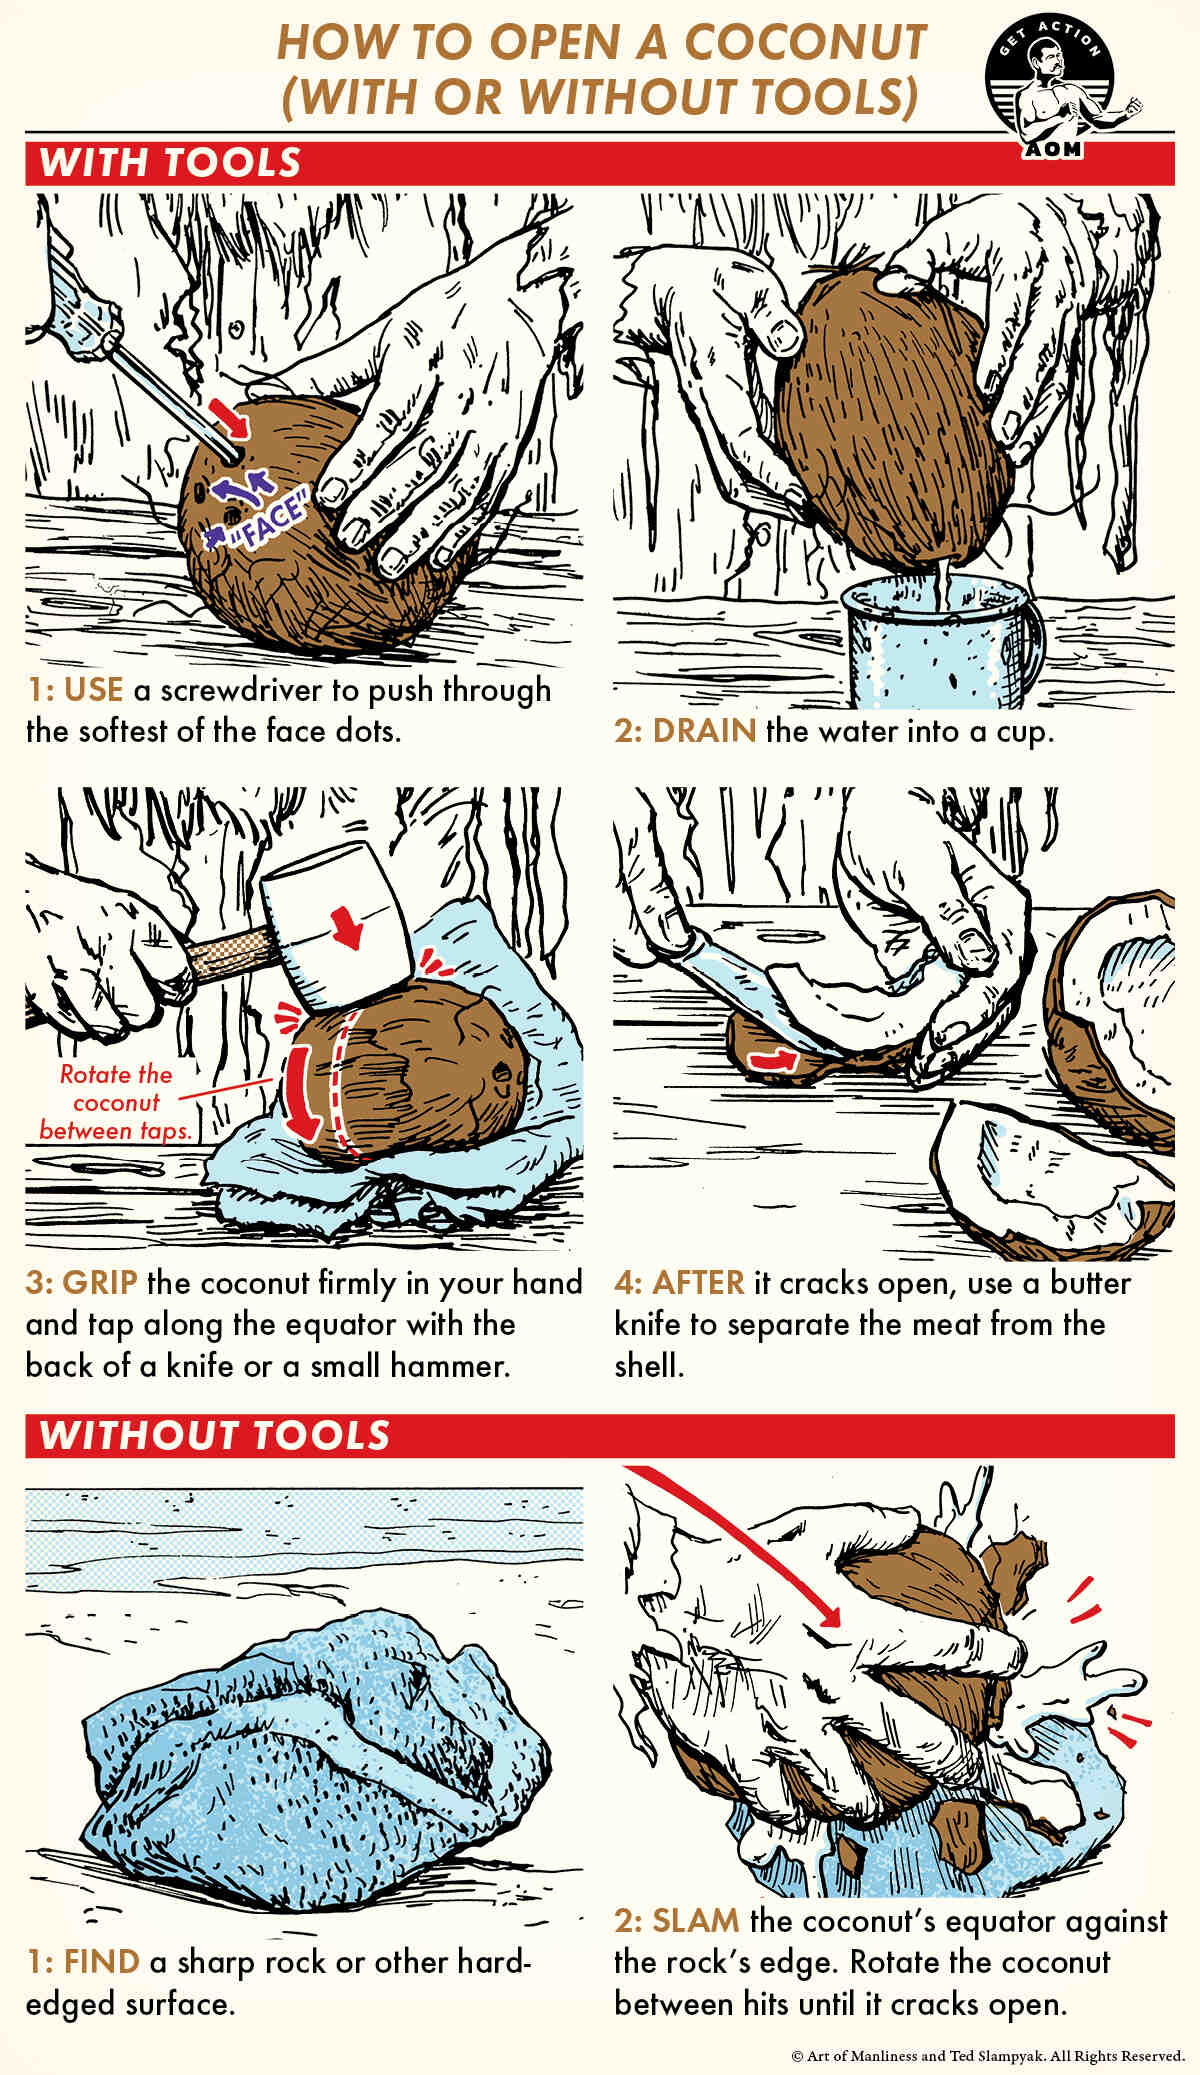 How do you break a coconut without a hammer?